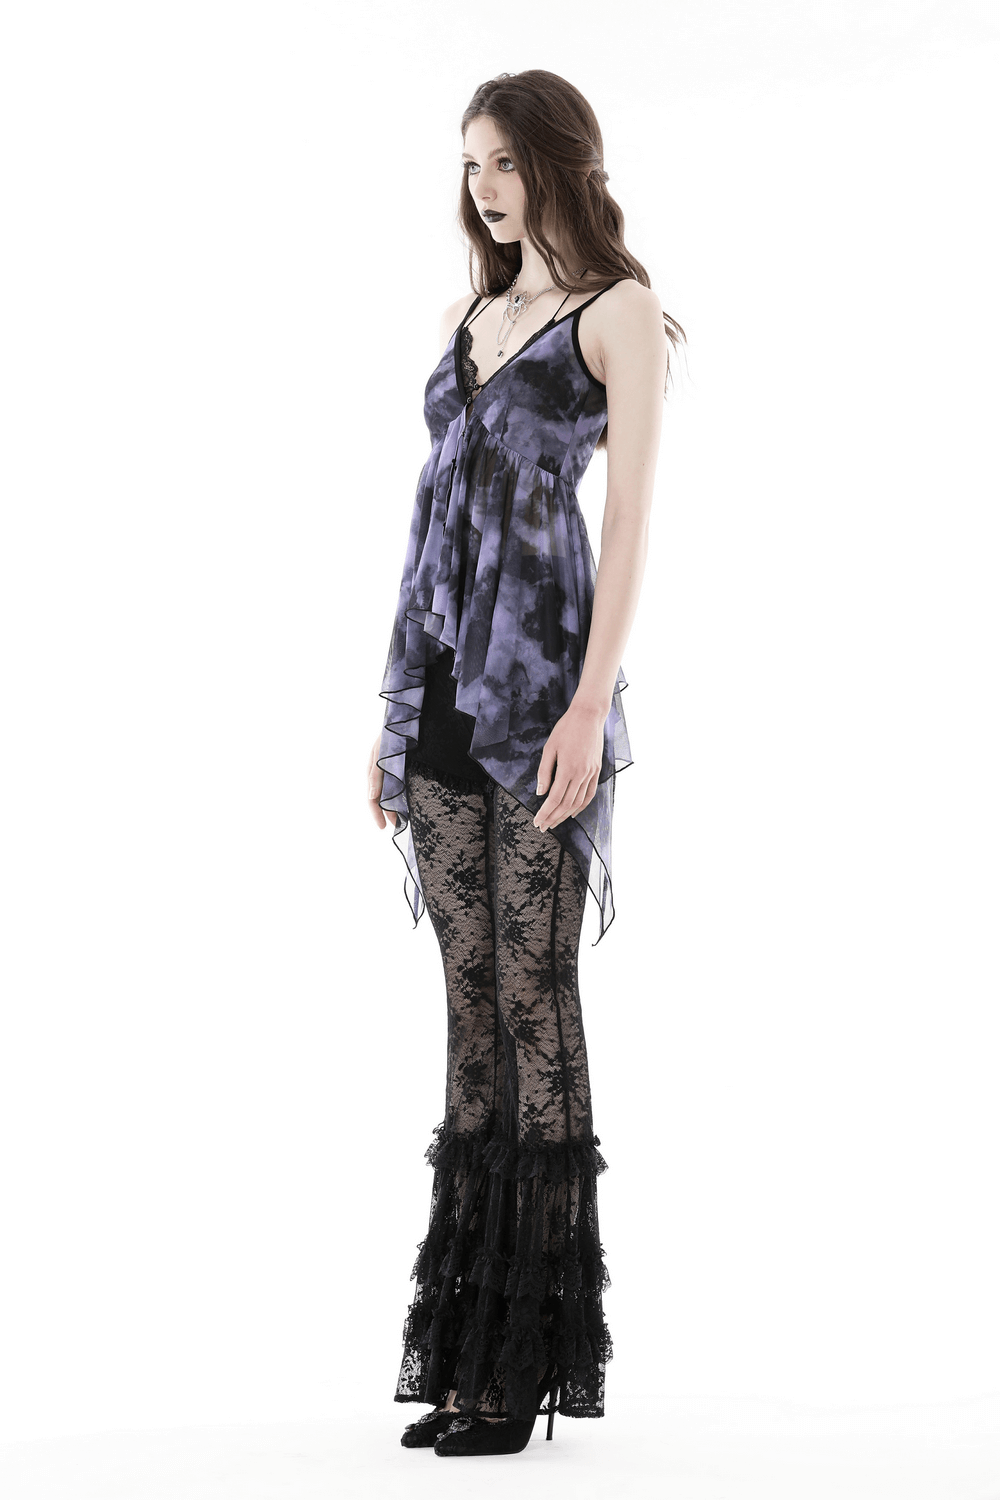 Gothic Lace Bell Bottoms - Stylish and Trendy Flare Pants